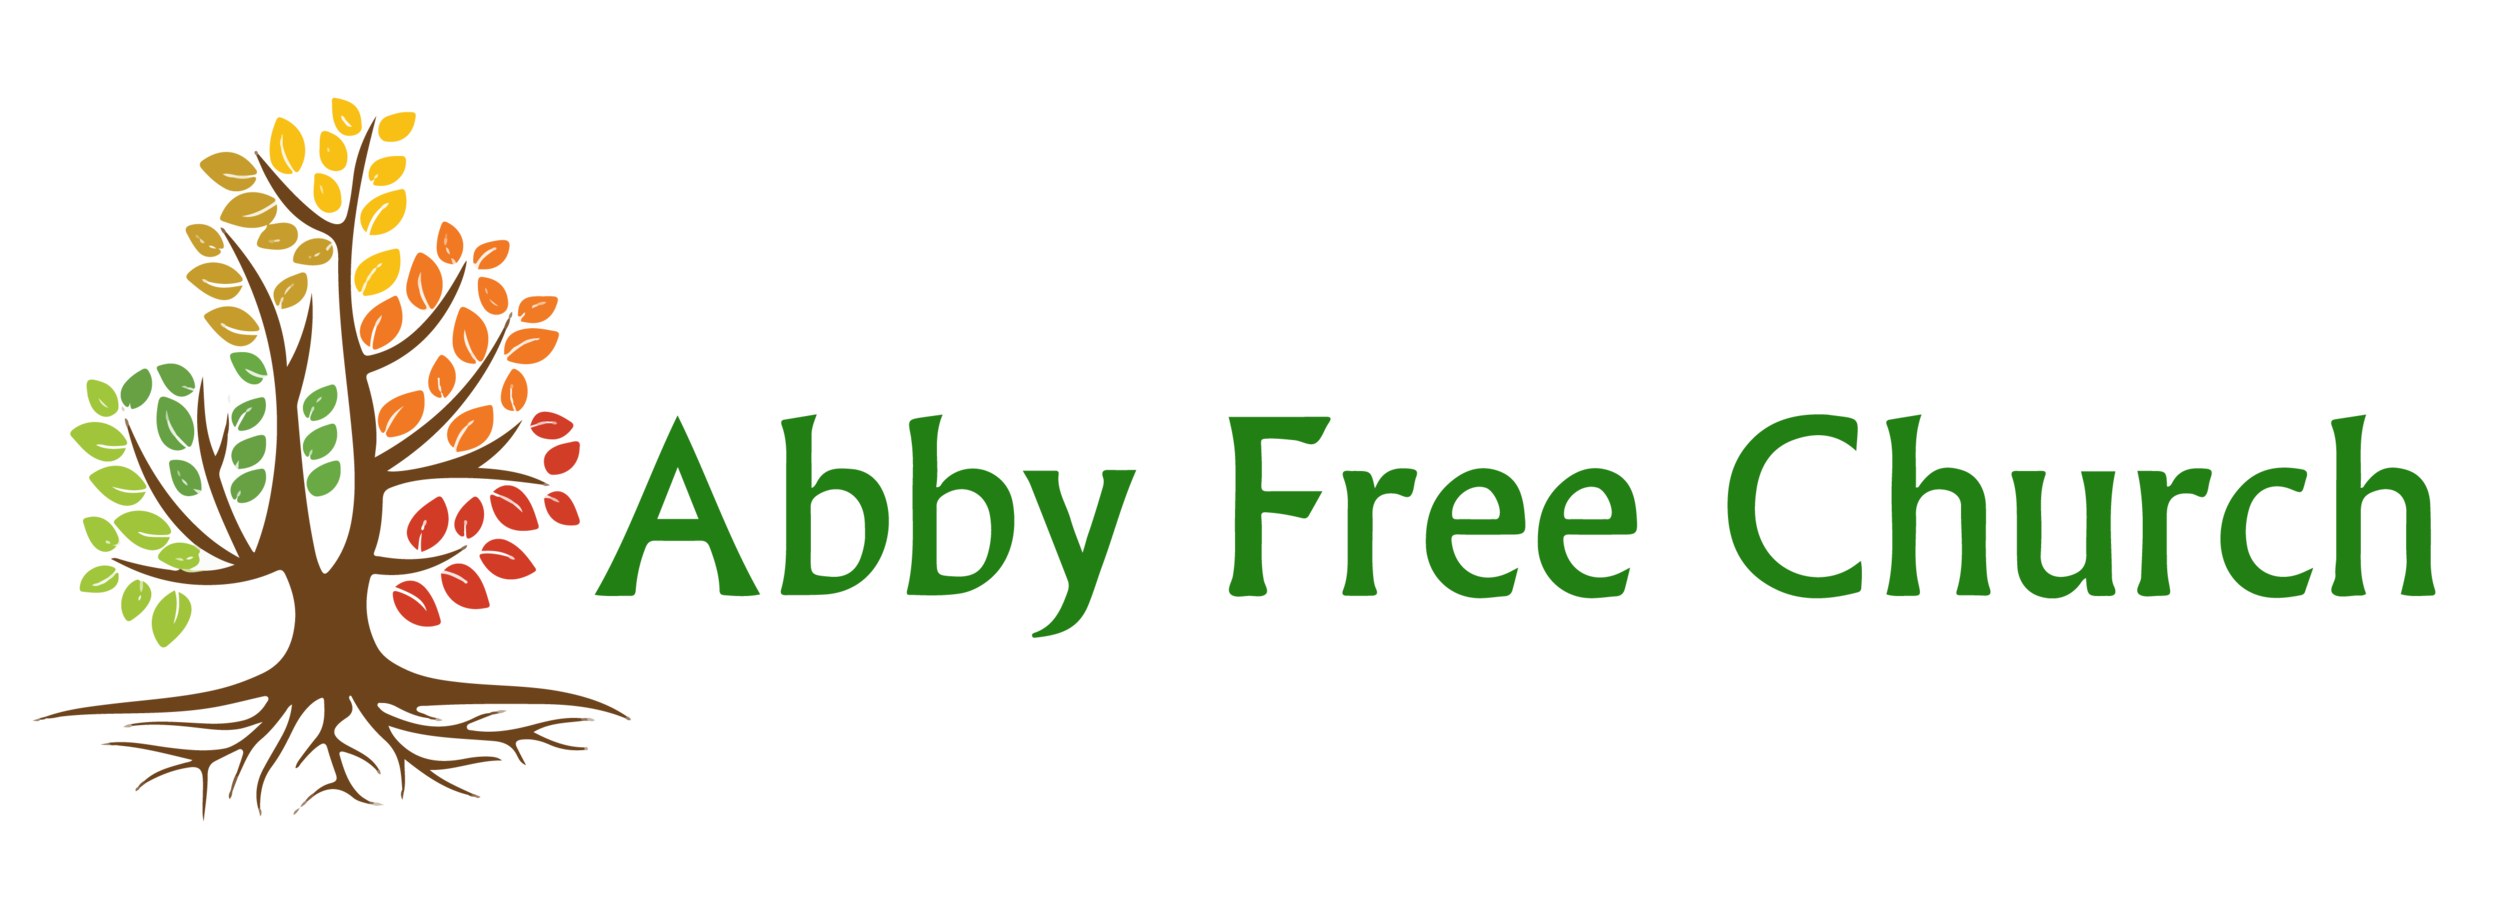 Abby Free Church | Evangelical Free Church in Abbotsford, Wisconsin